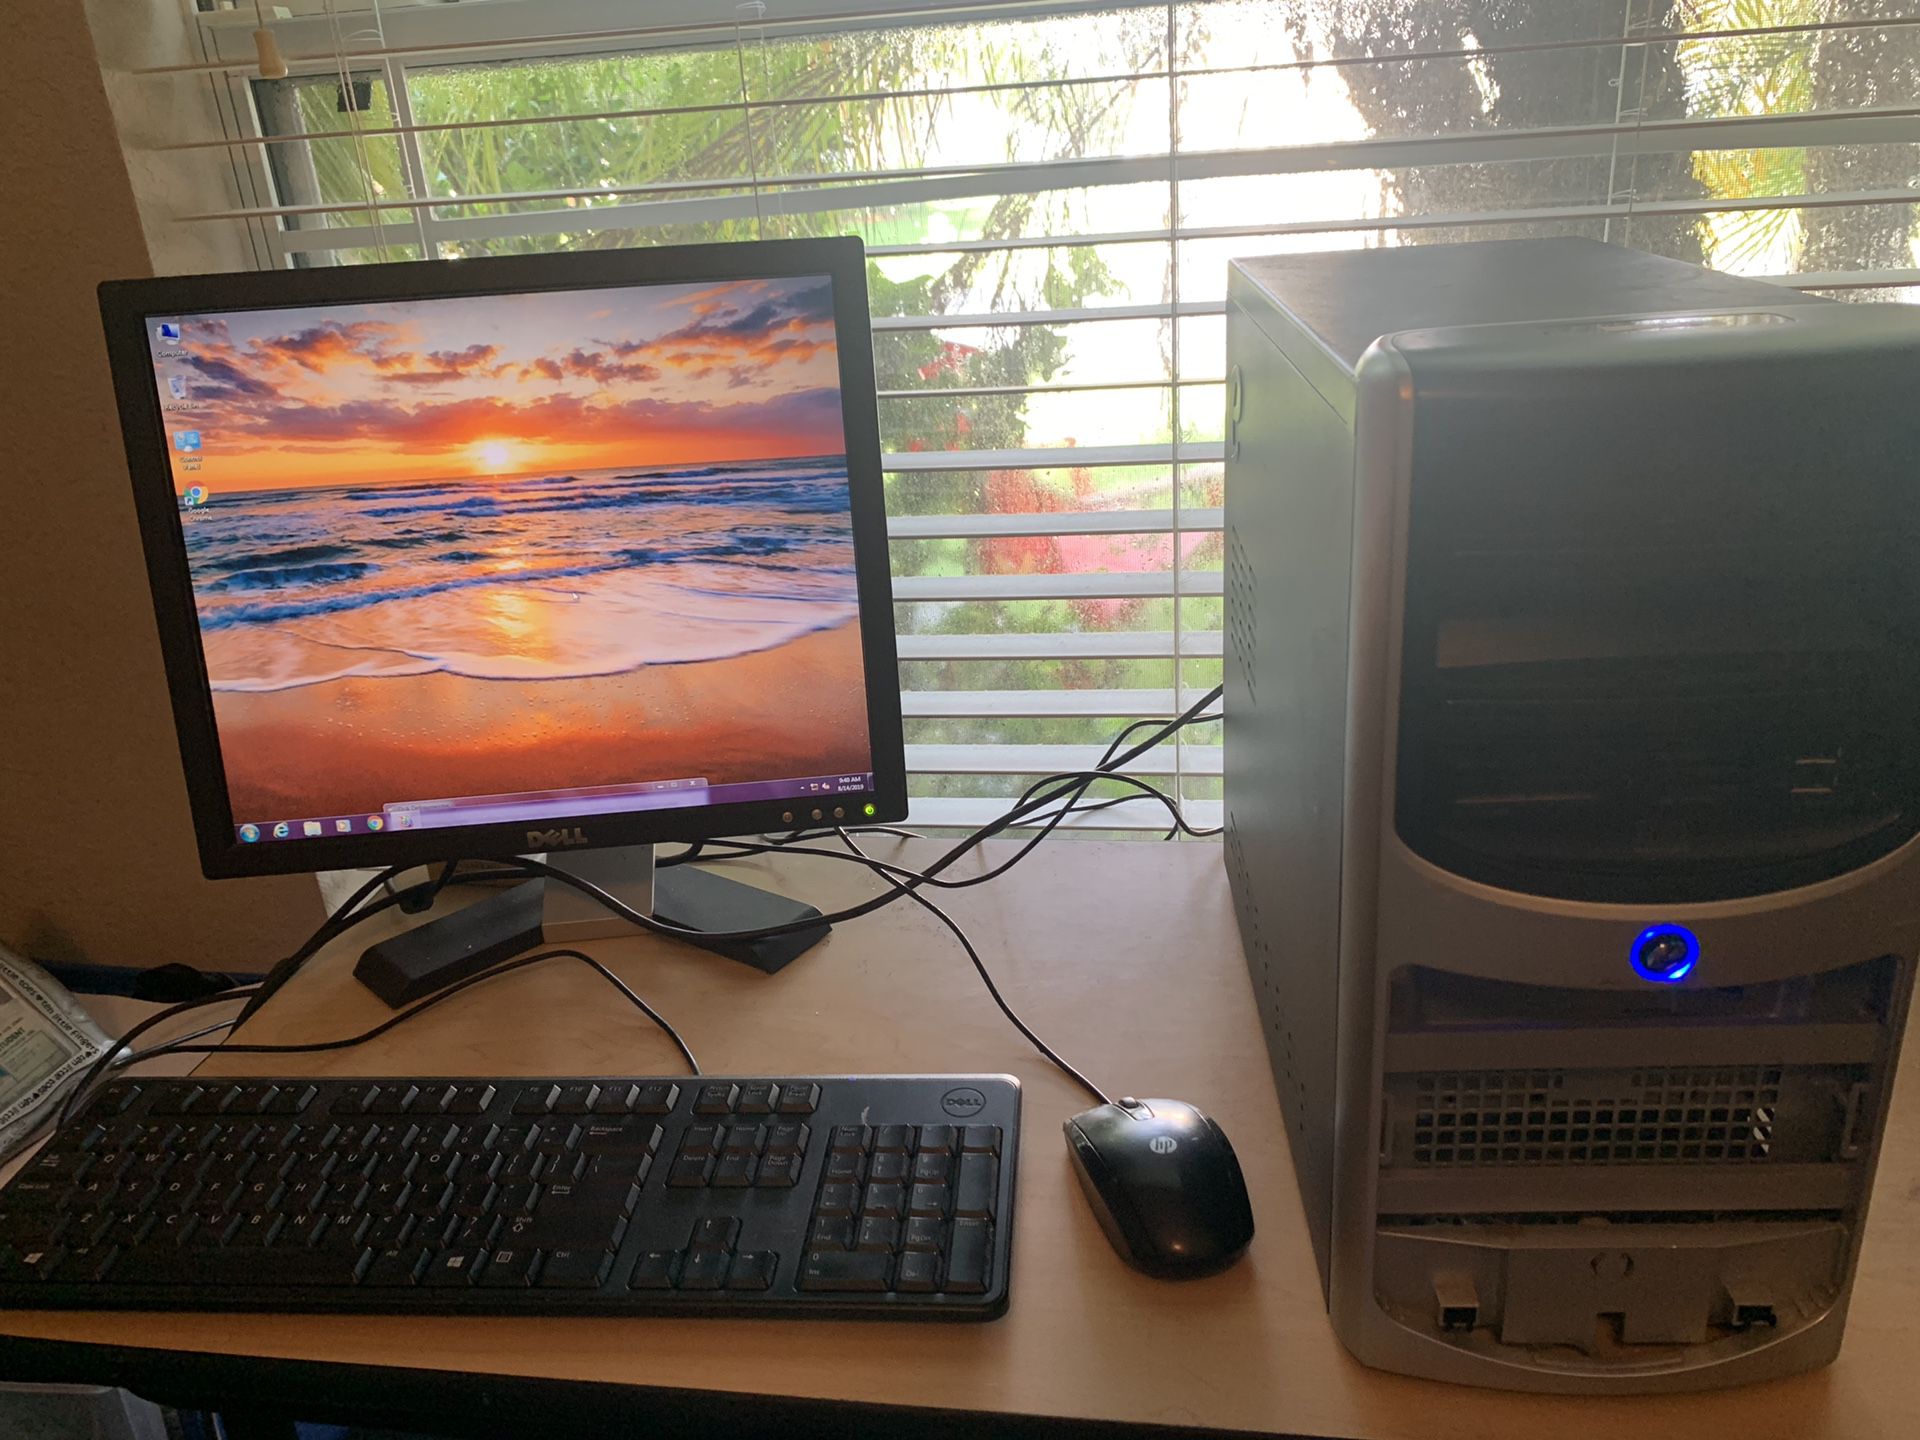 Complete Desktop Setup . Windows 7. Microsoft office. 160 gig hd . 3.2ghz intel cpu. LCD. Keyboard and mouse. Desk Included